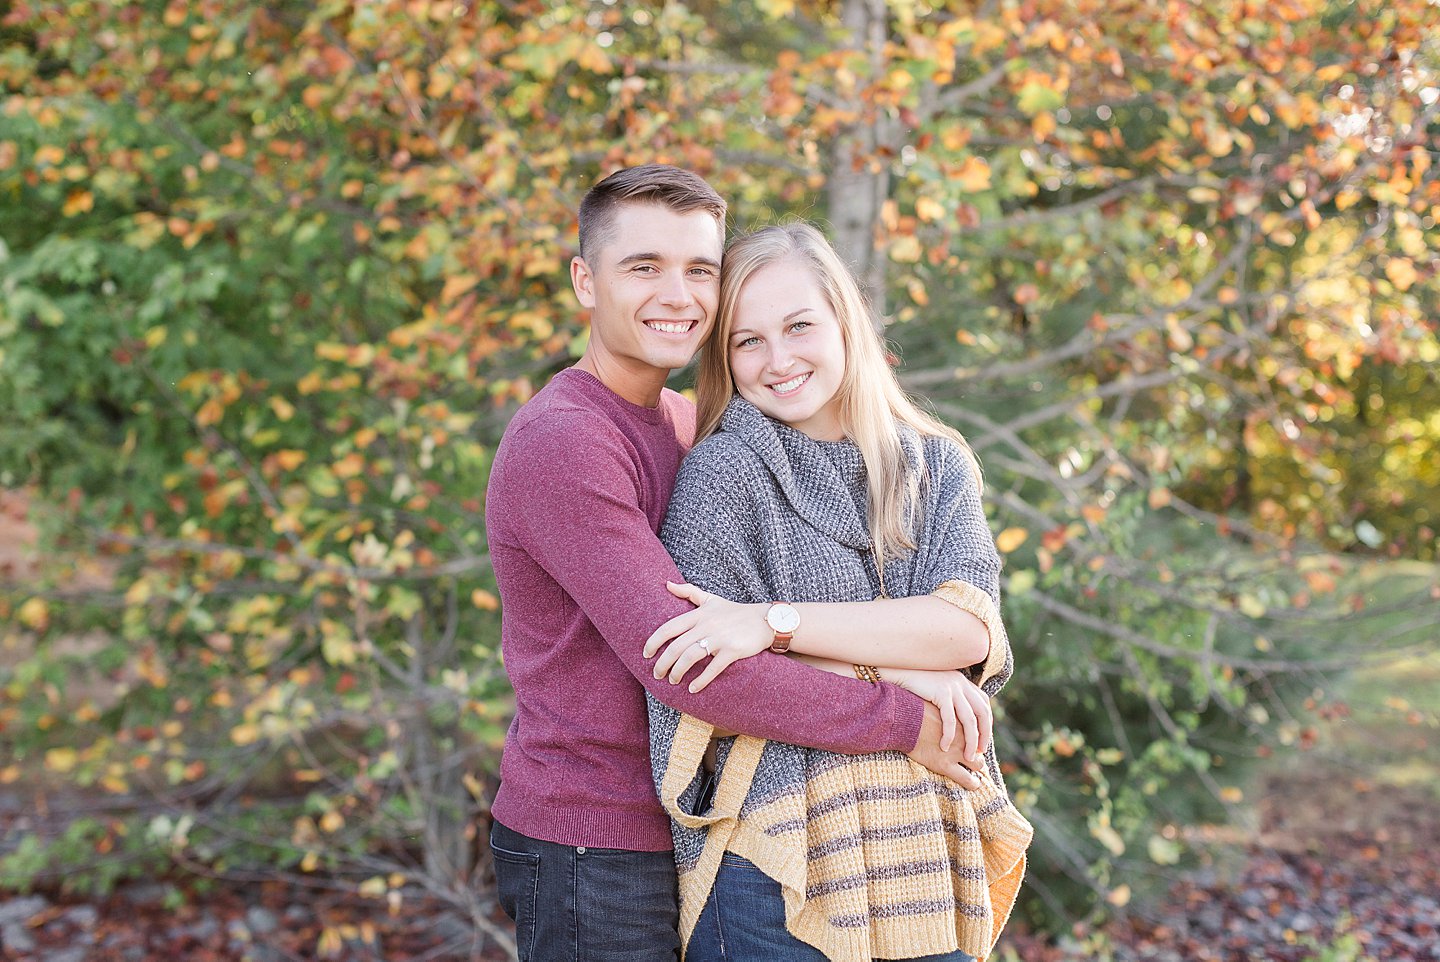 jeter mountain engagement portrait in fall